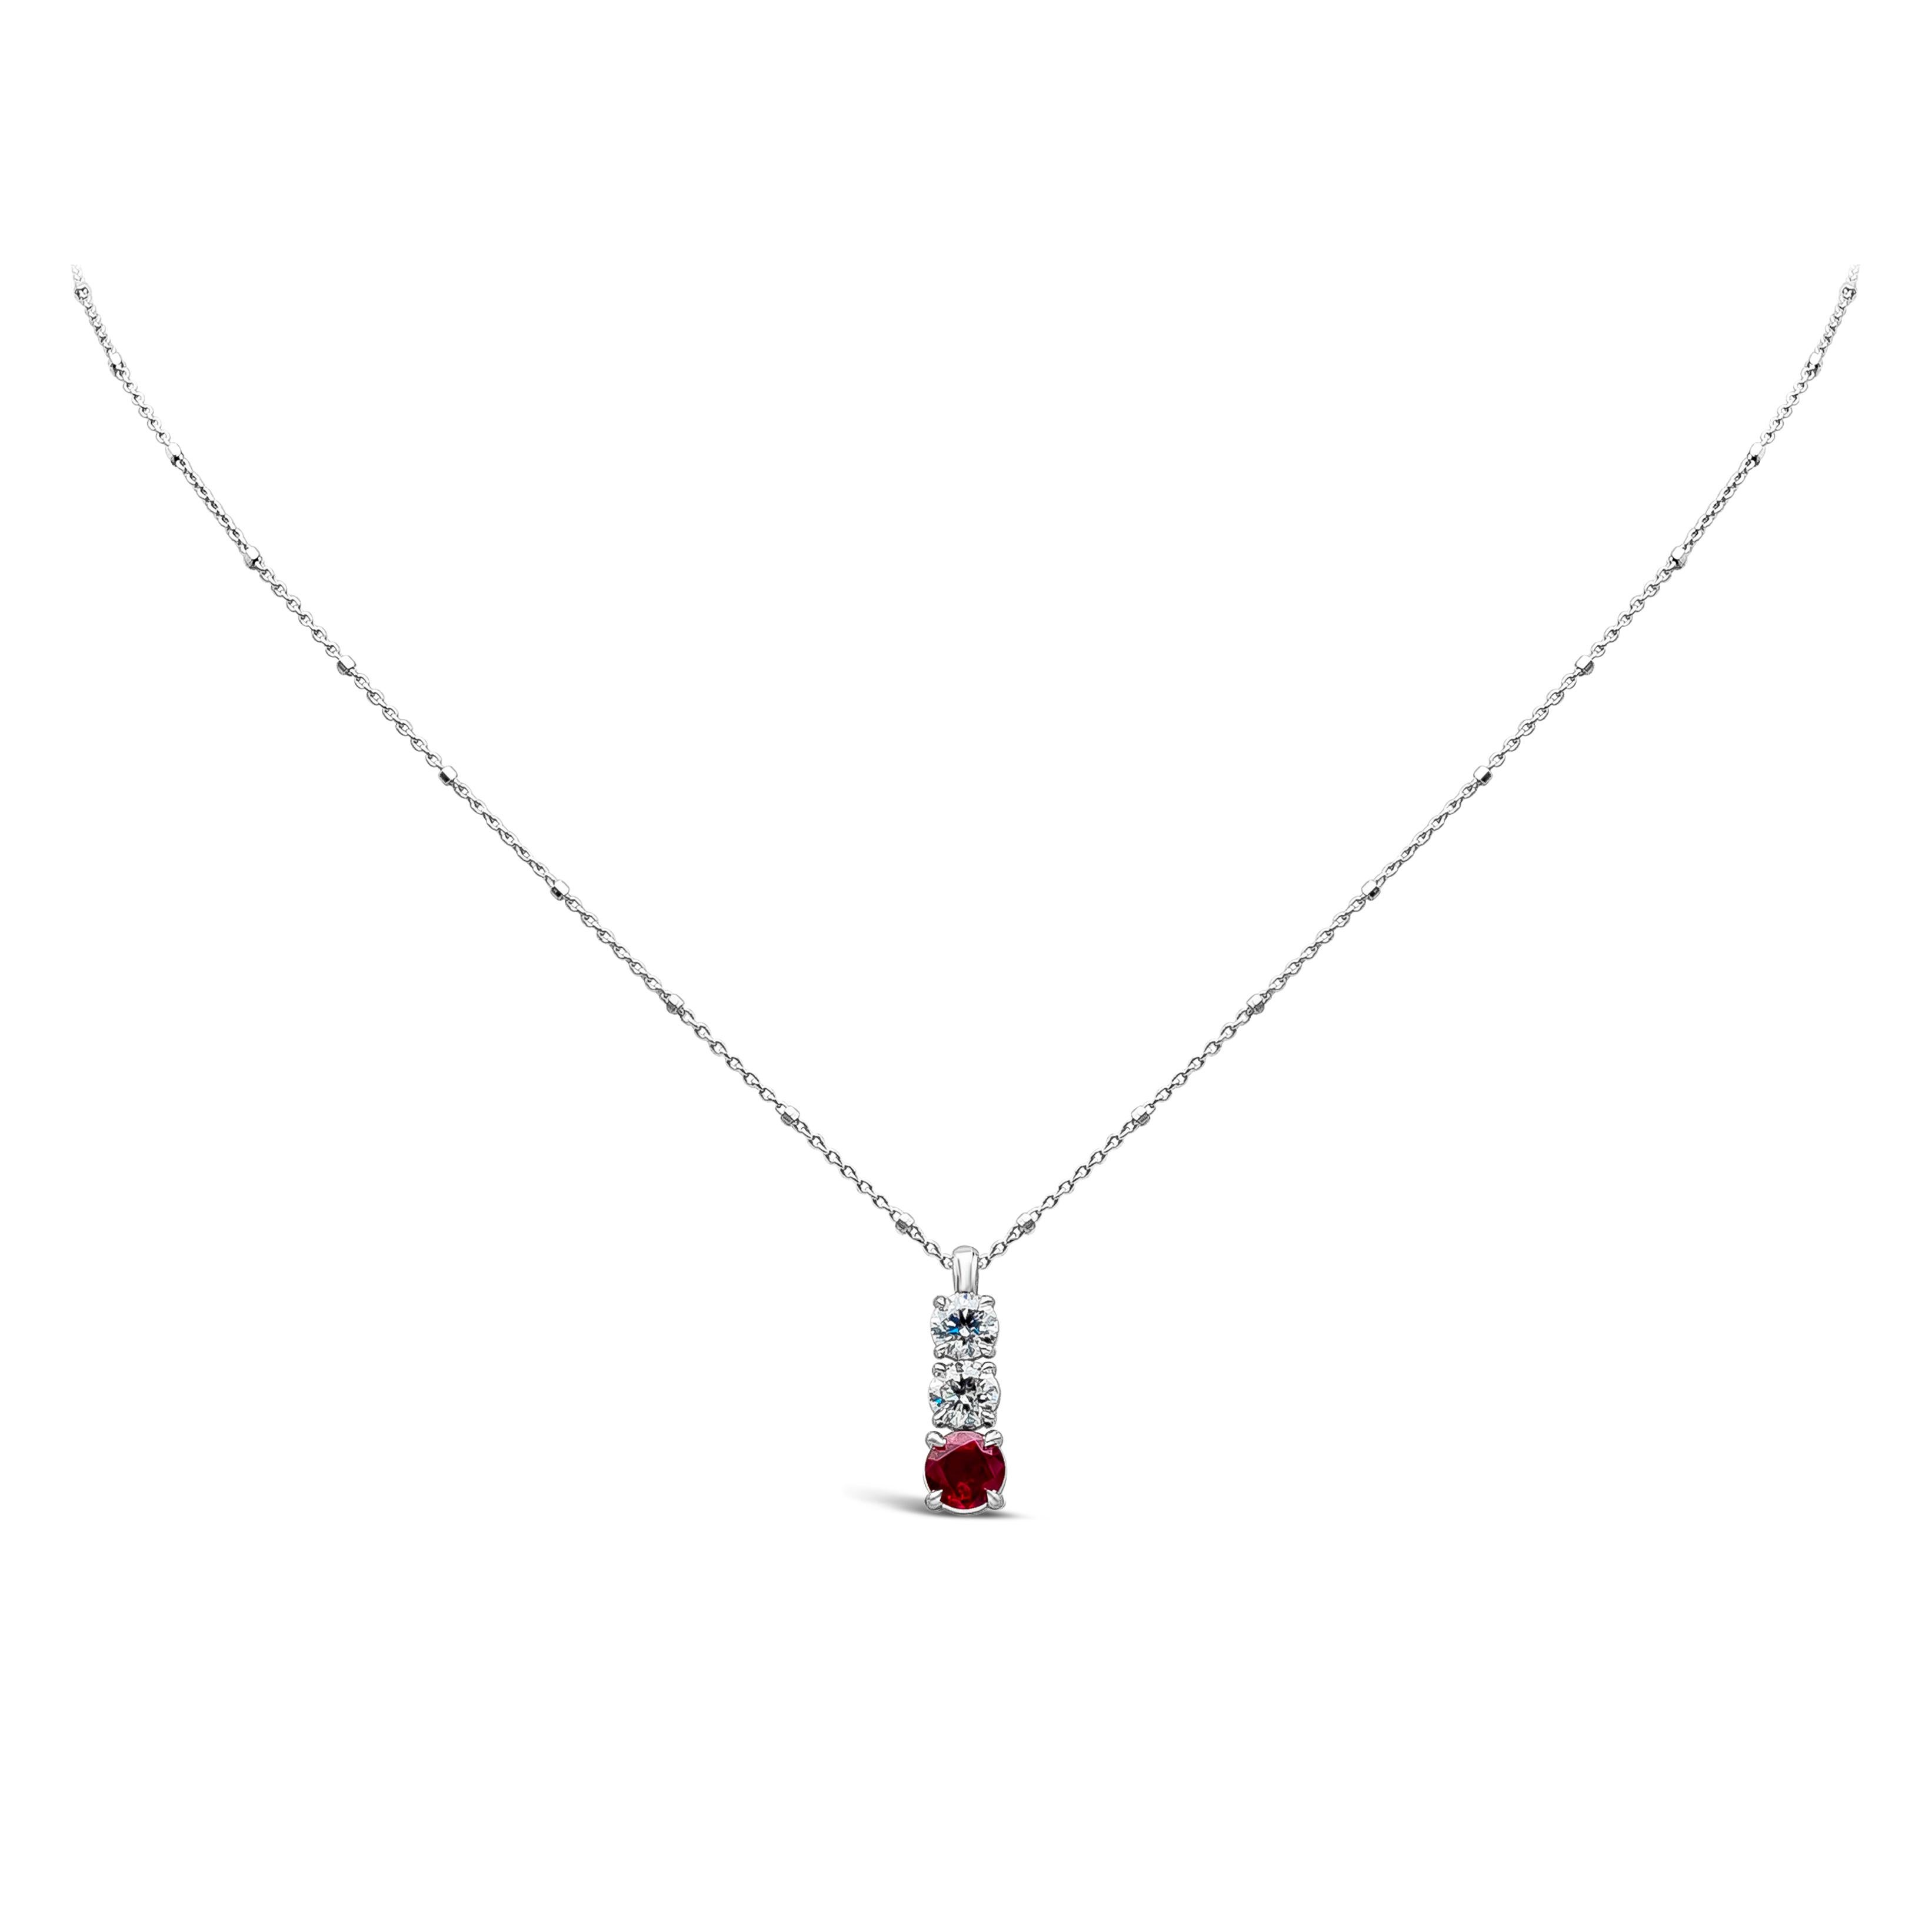 A simple and very stylish piece of jewelry features a three-stone pendant necklace showcasing a burma ruby weighing 0.89 carat total, and round white diamonds weighing 0.87 carats total, F Color and SI in Clarity. Set in a classic 4 prong setting,